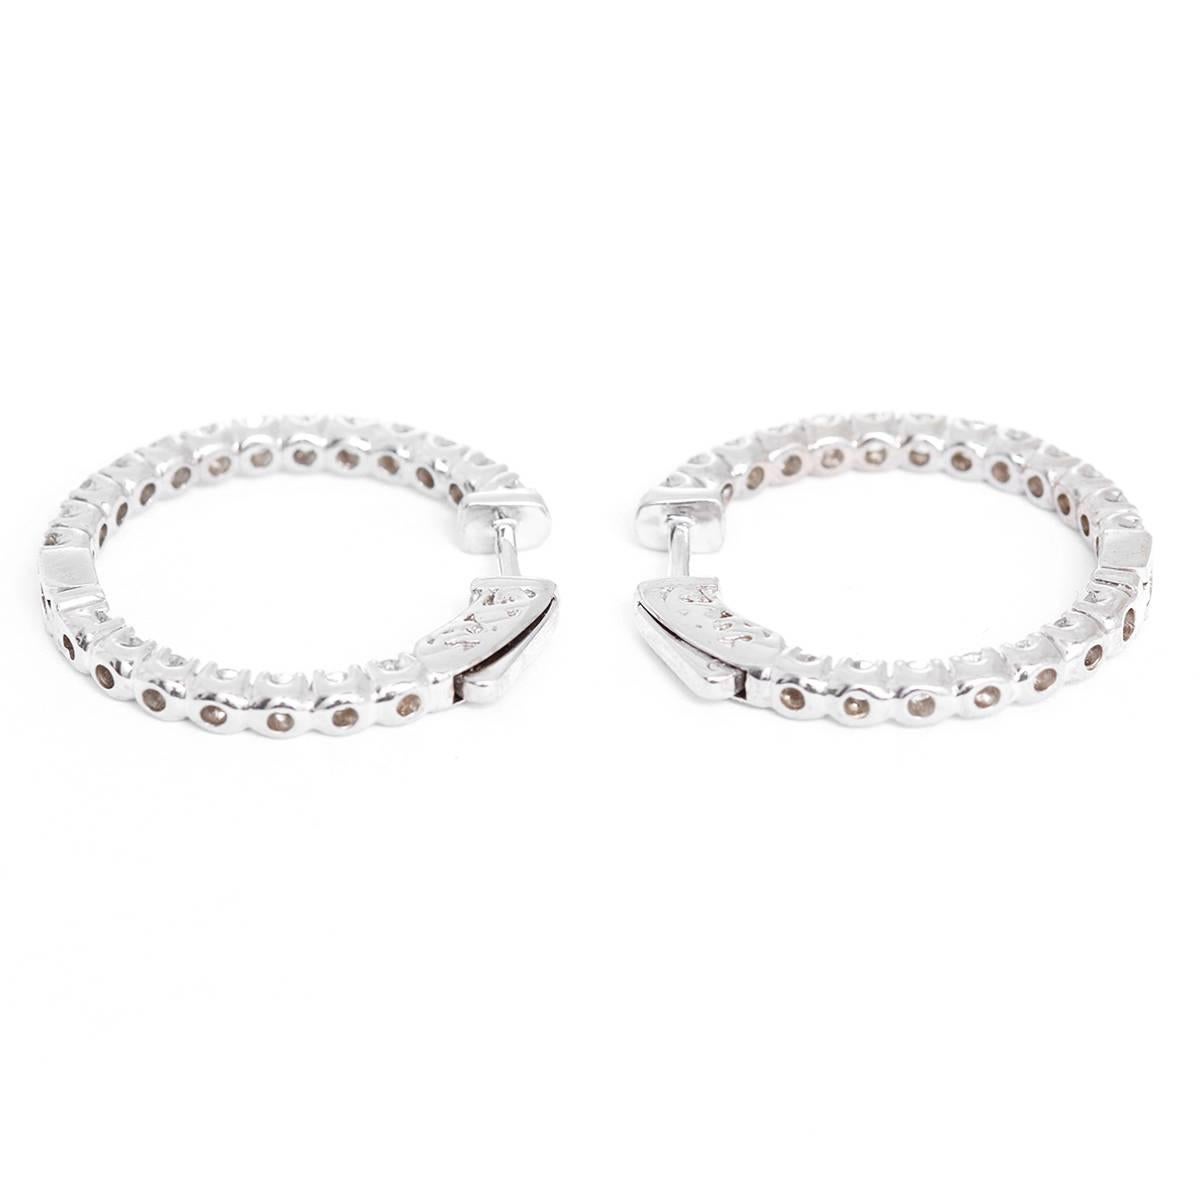 These inside-out style hoop earrings feature 1.86 carats of SI1-S2-clarity and H-I-color diamonds set in 14k white gold. Earrings measure apx. 1- inch in diameter.  Total weight is 7.4 grams.